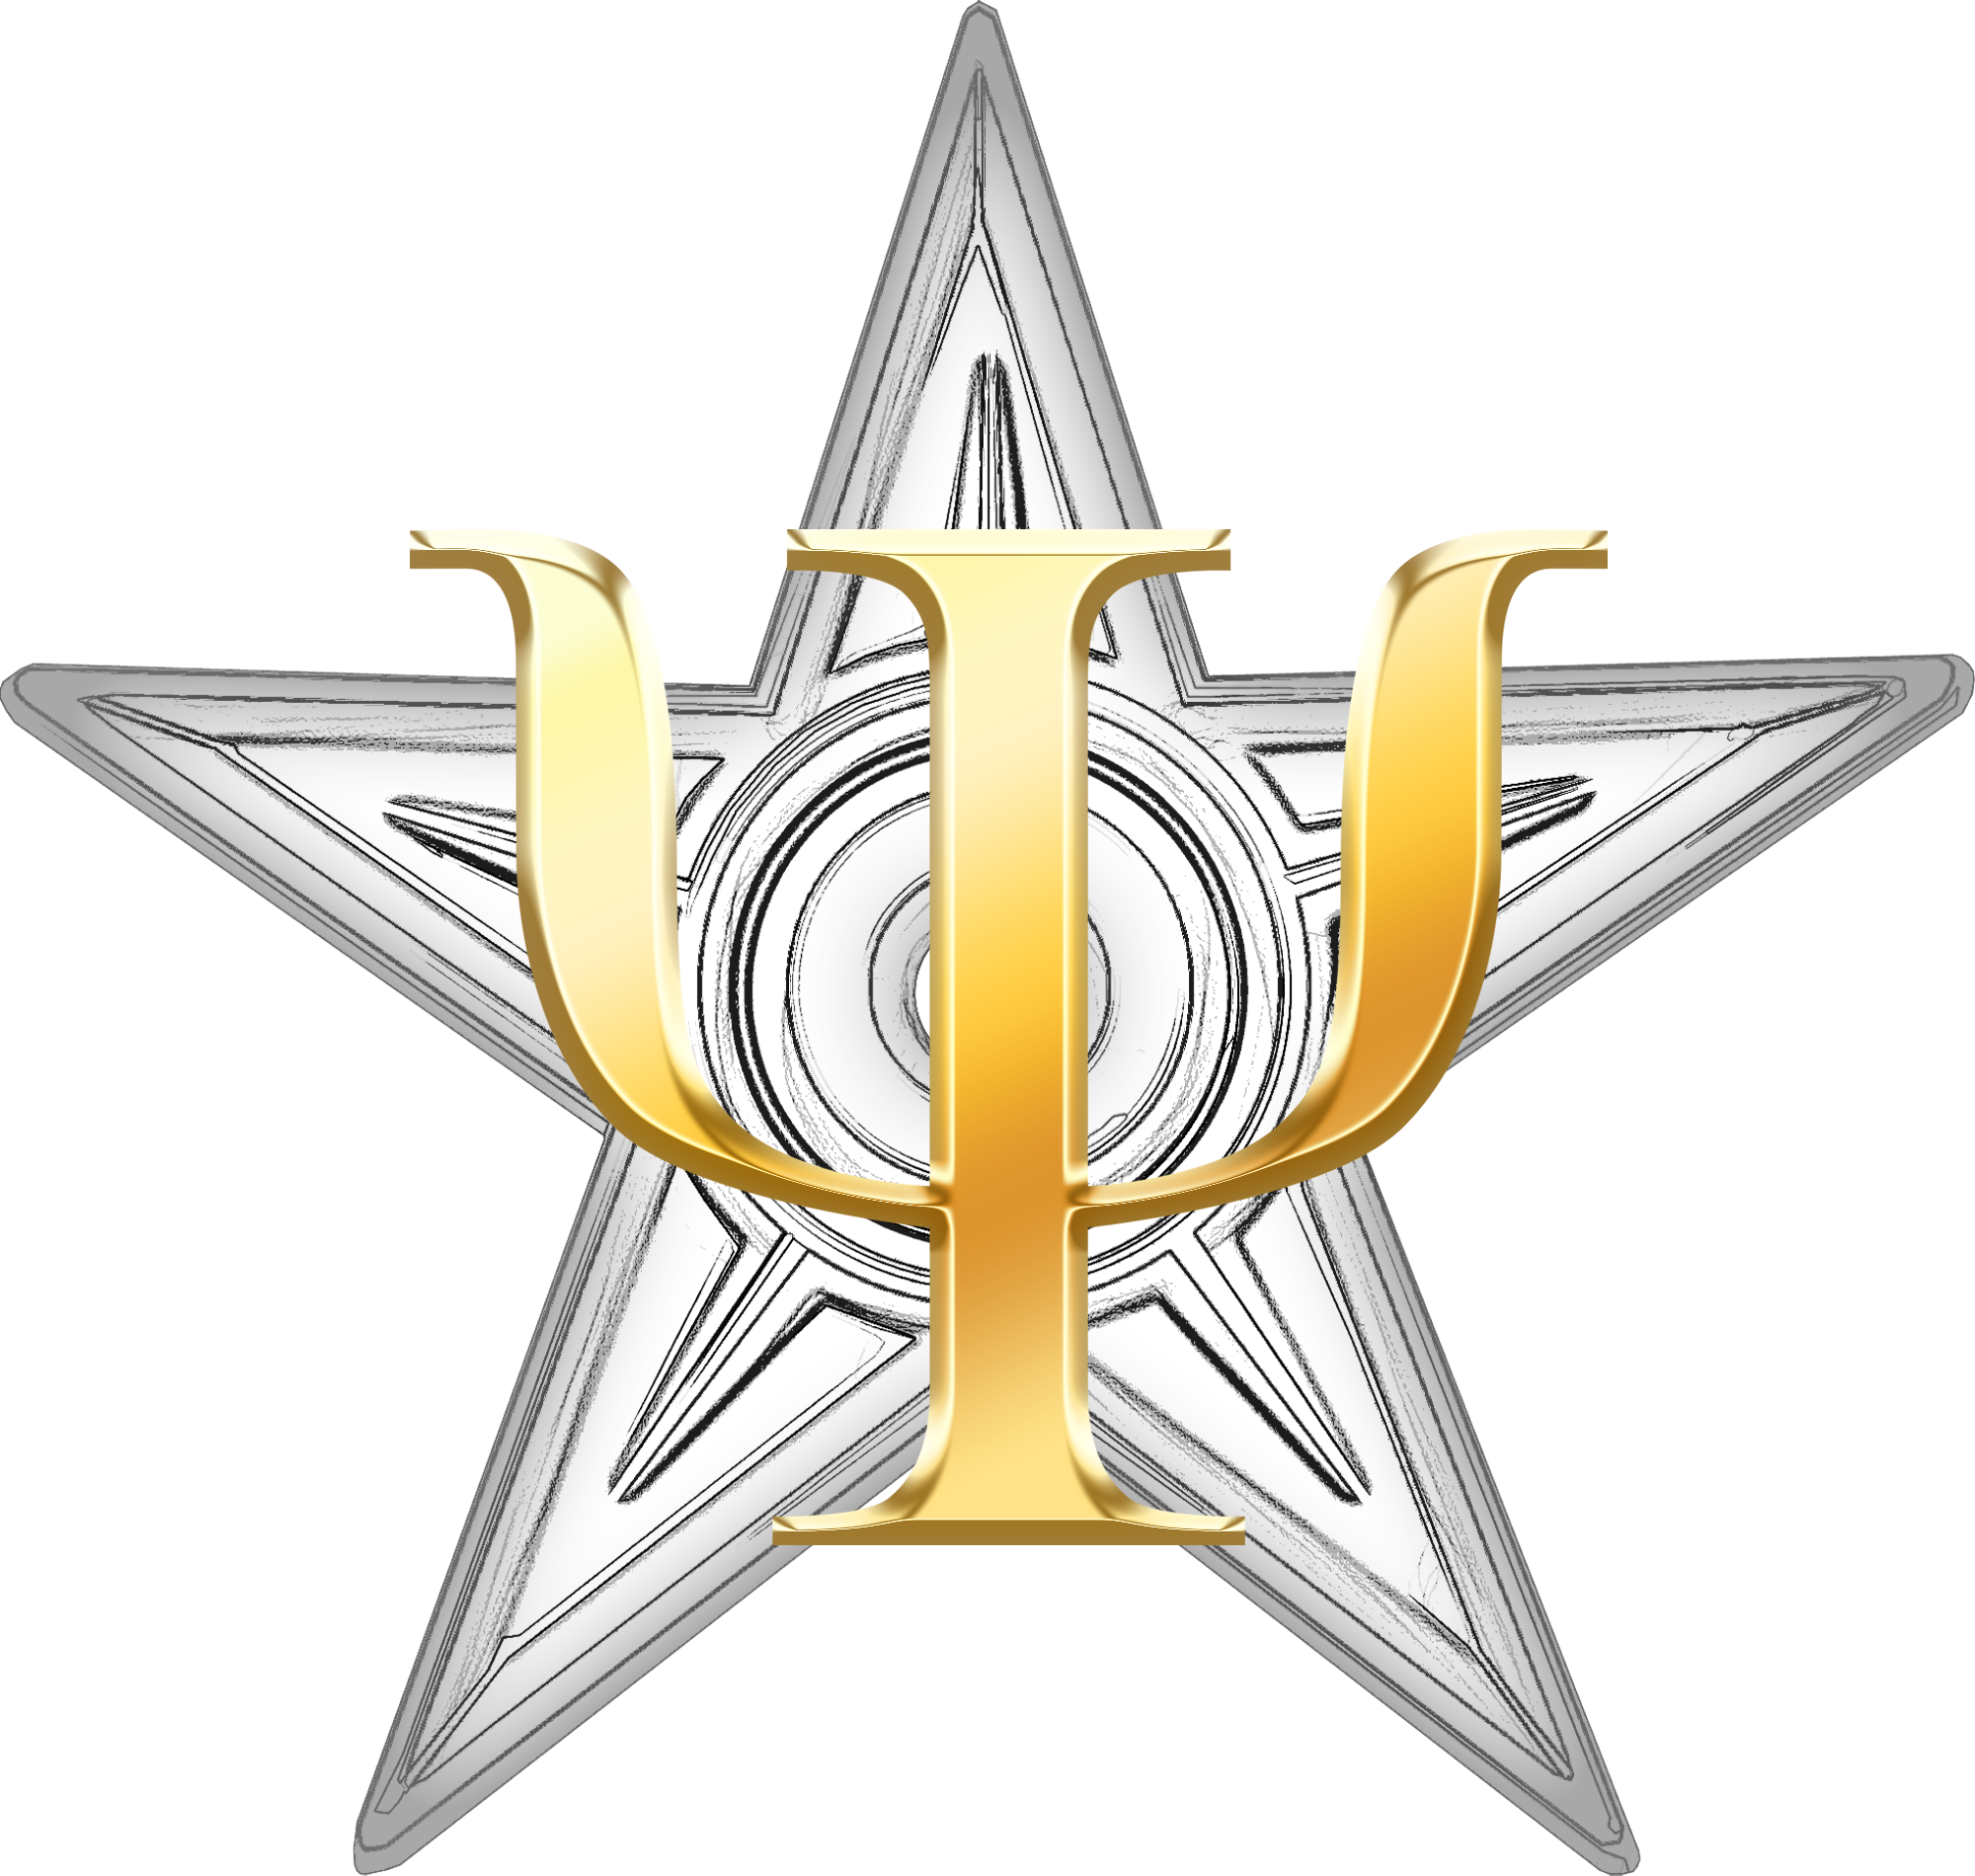 A Silver And Gold Symbol